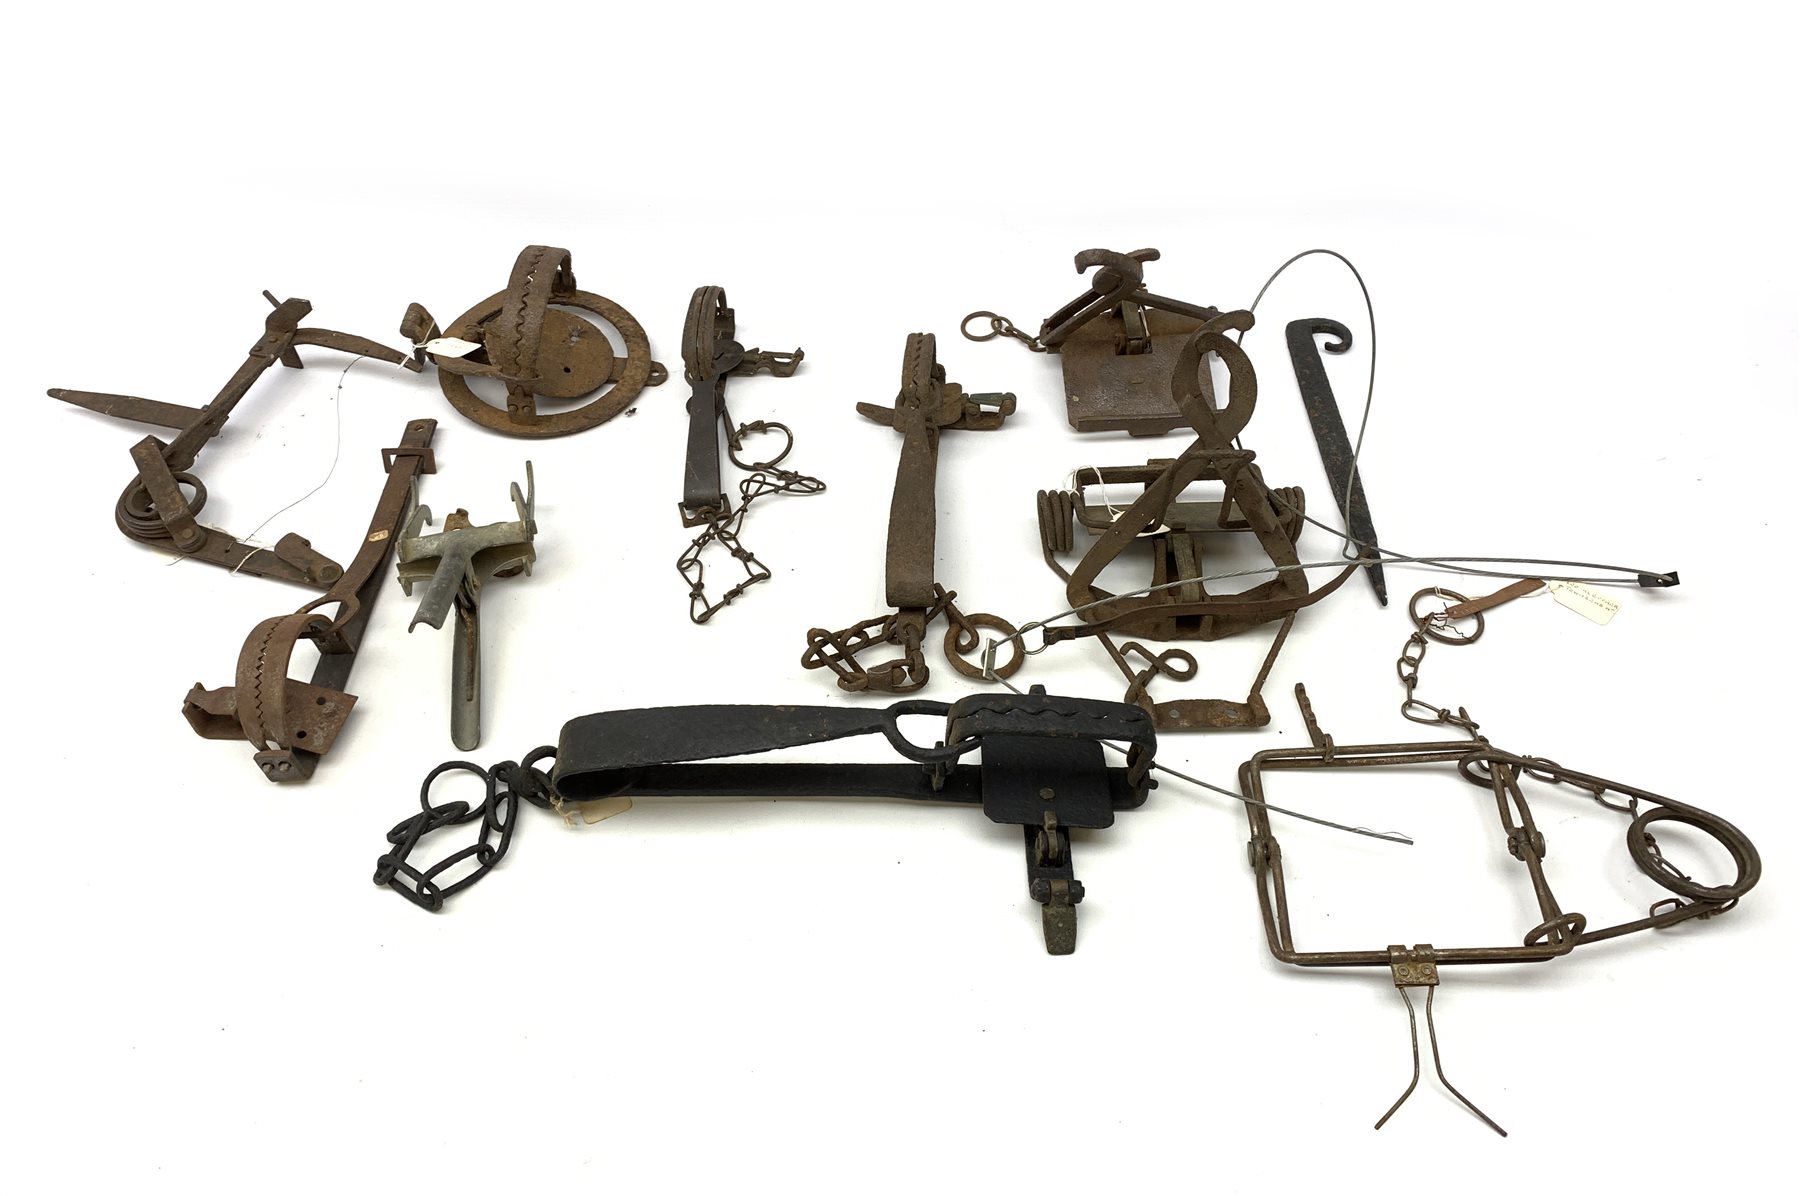 Ten animal traps and snares including Imbra, 'The Juby Trap', H. Lane gin trap, Pole Trap, mole trap